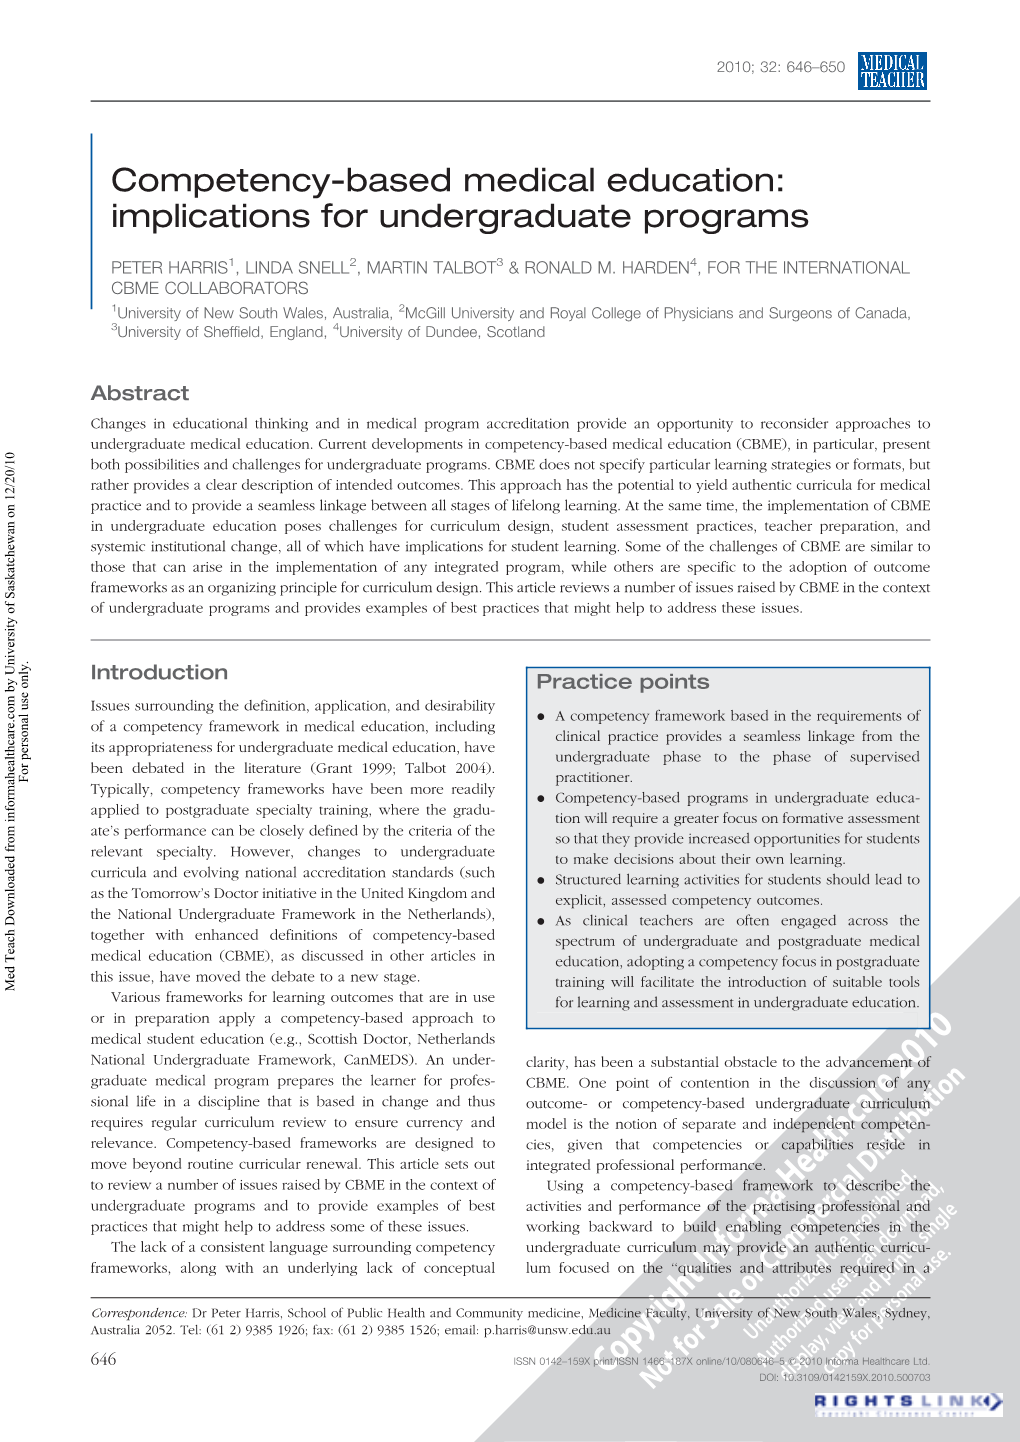 Competency-Based Medical Education: Implications for Undergraduate Programs